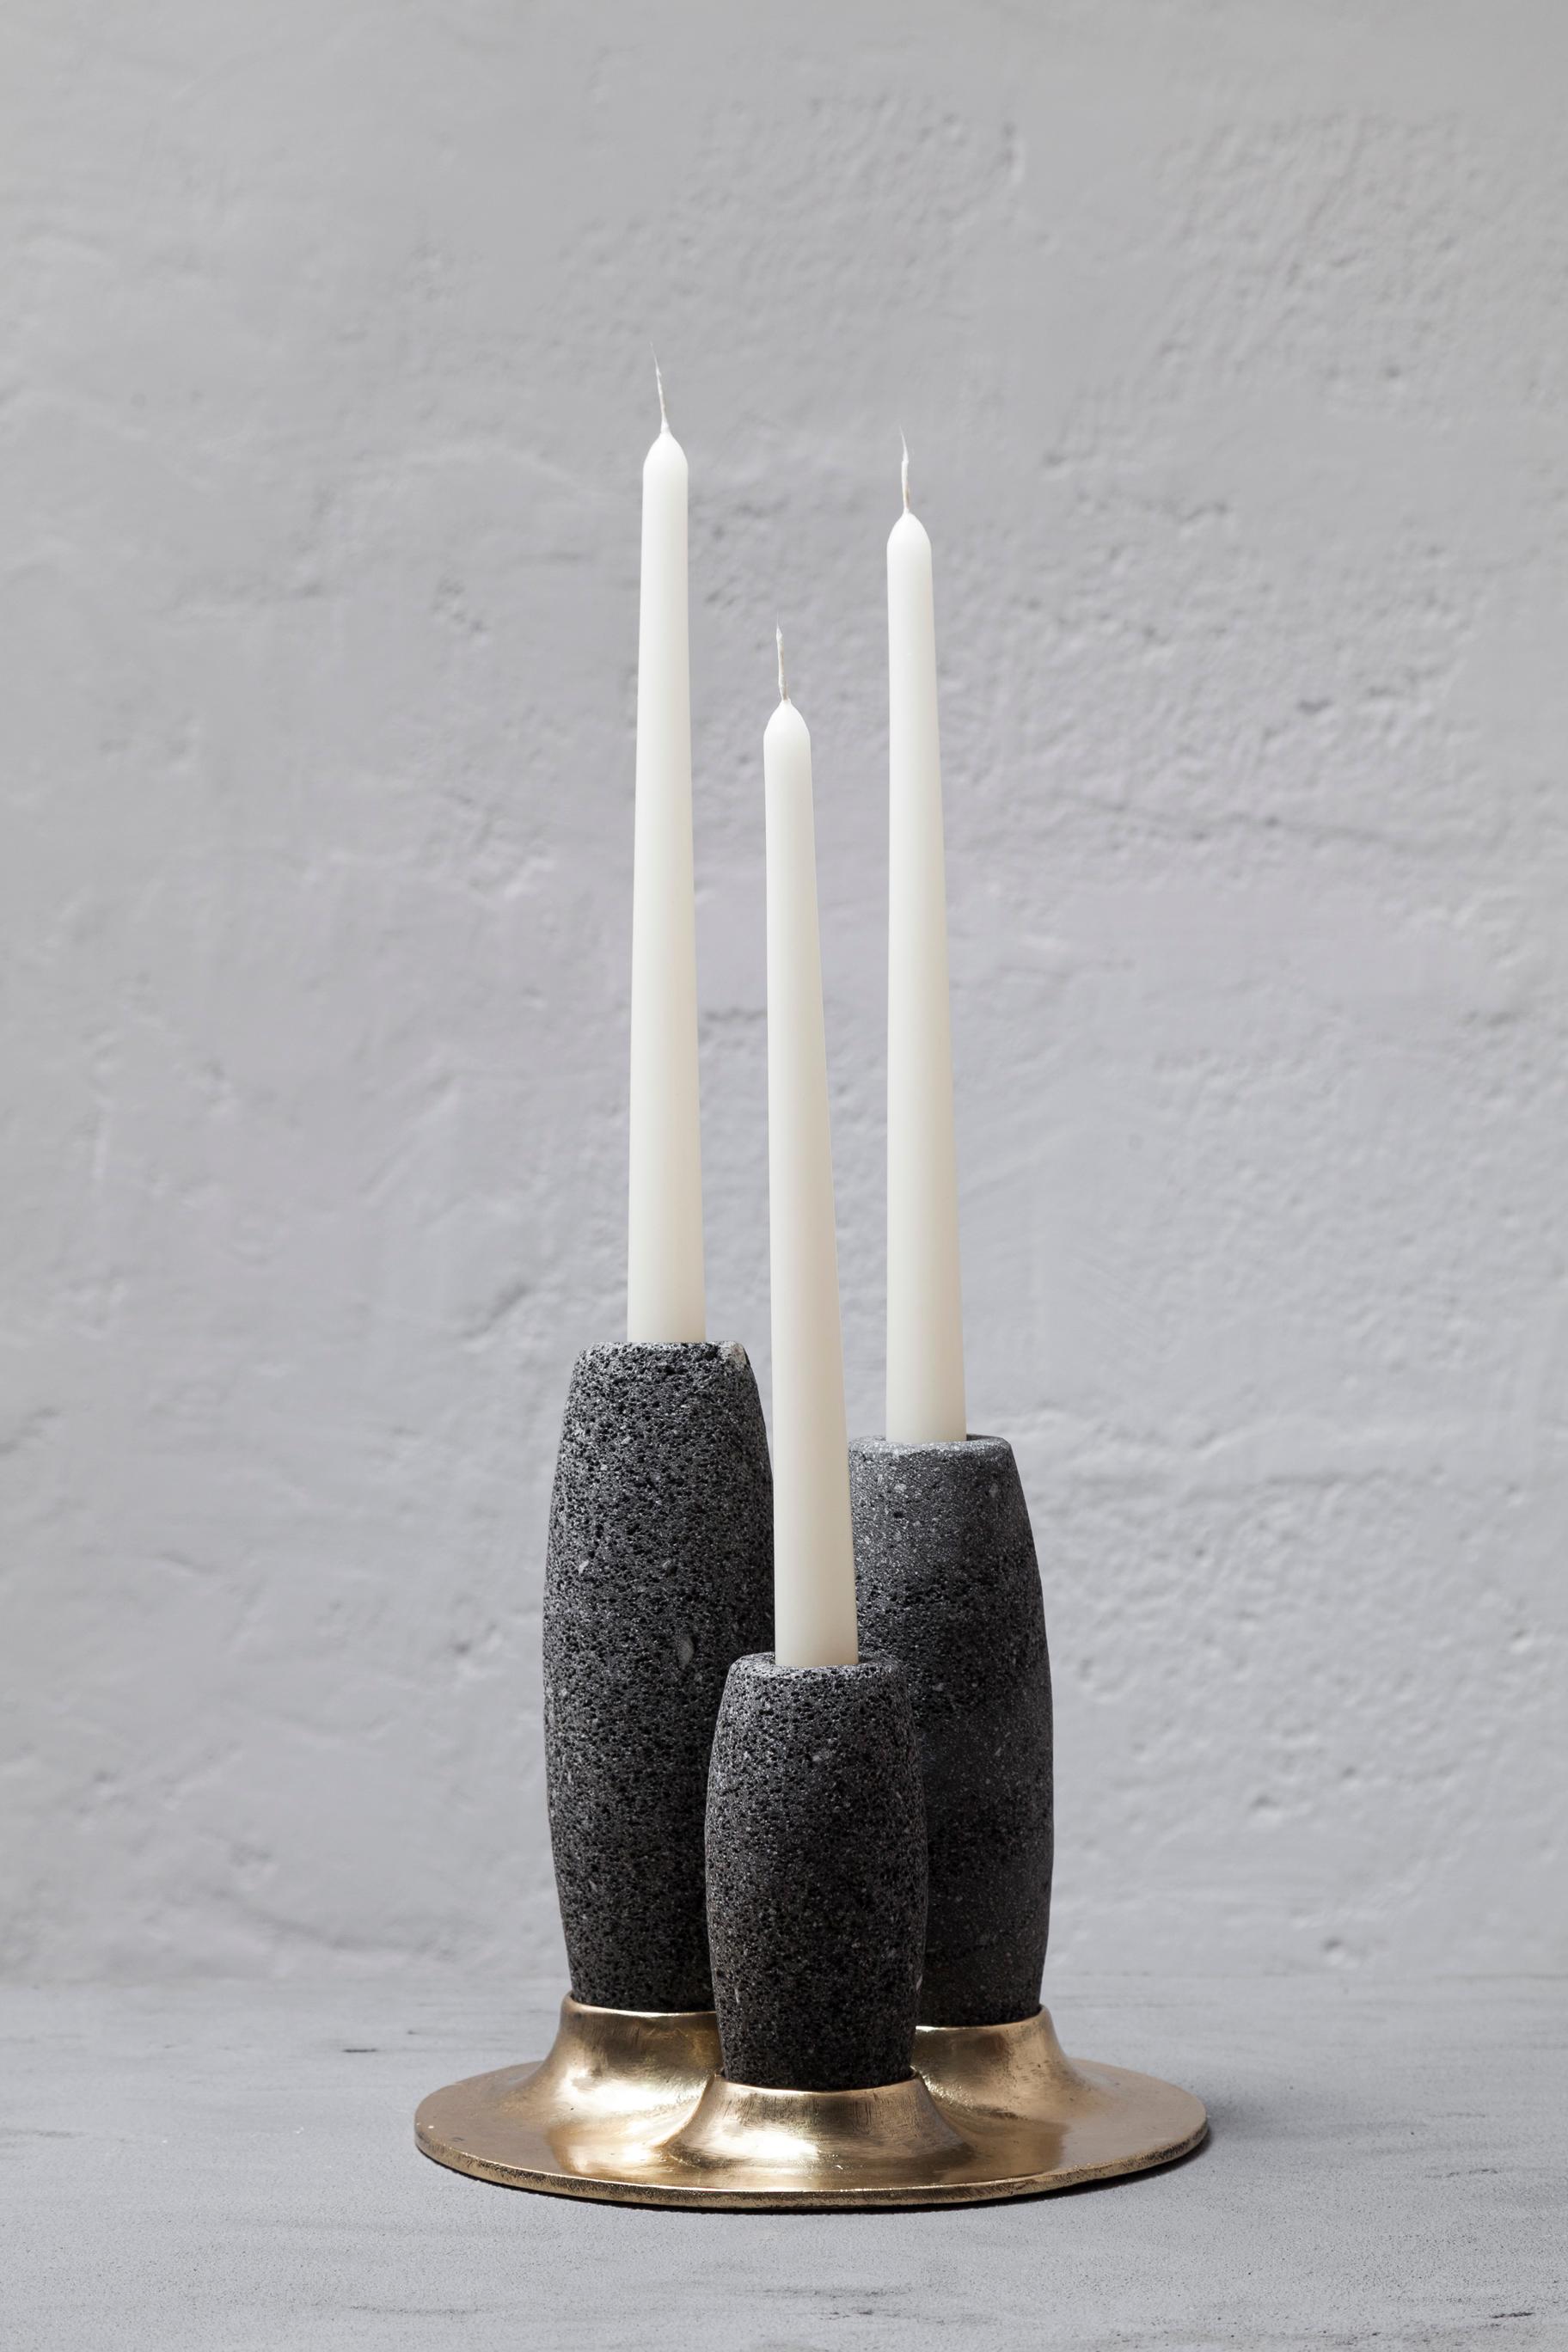 SALAR is a sculptural candle holder, composed of a sand-cast bronze base, and hand-carved volcanic stone candle holders. The shape is a representation of the traditional process used for the production of salt in colonial times. In Salinas de